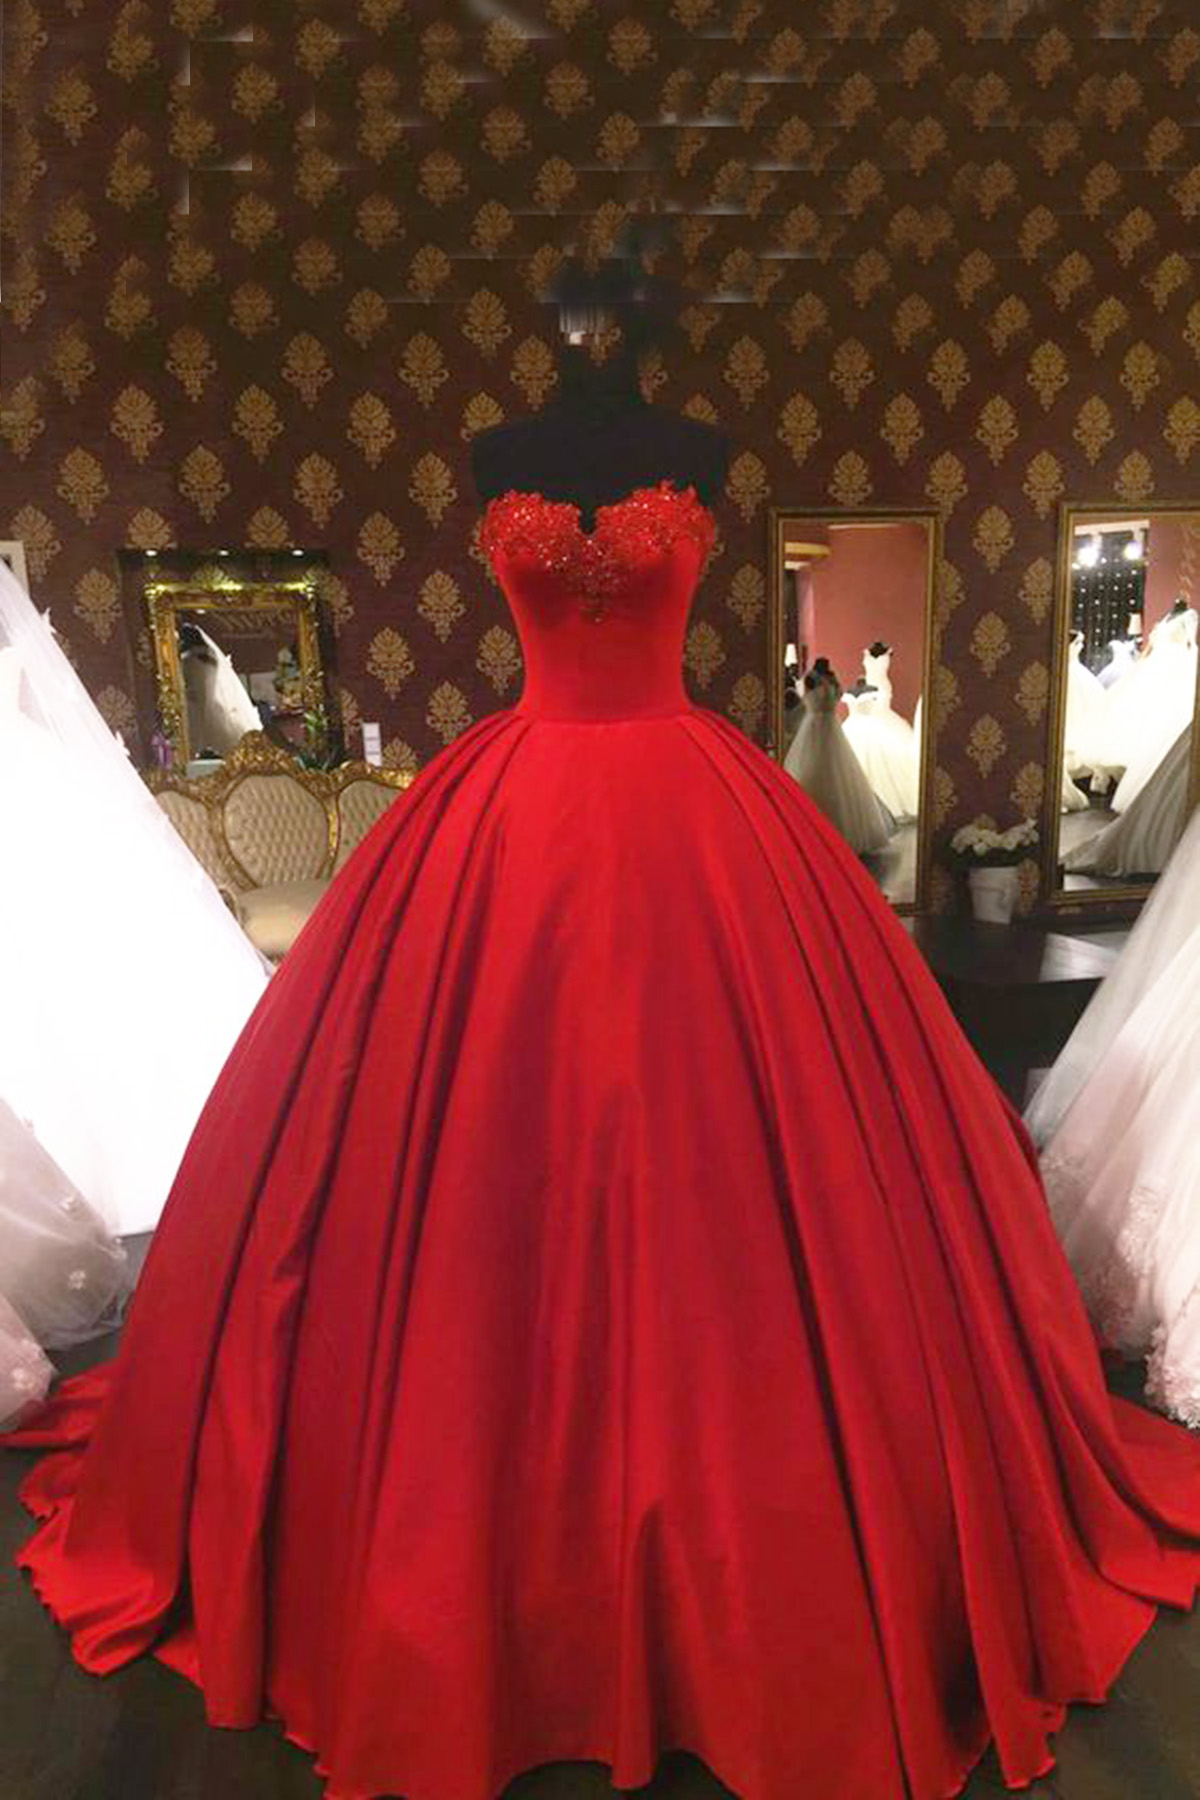 Red Strapless Ball Gown on Sale, 50 ...